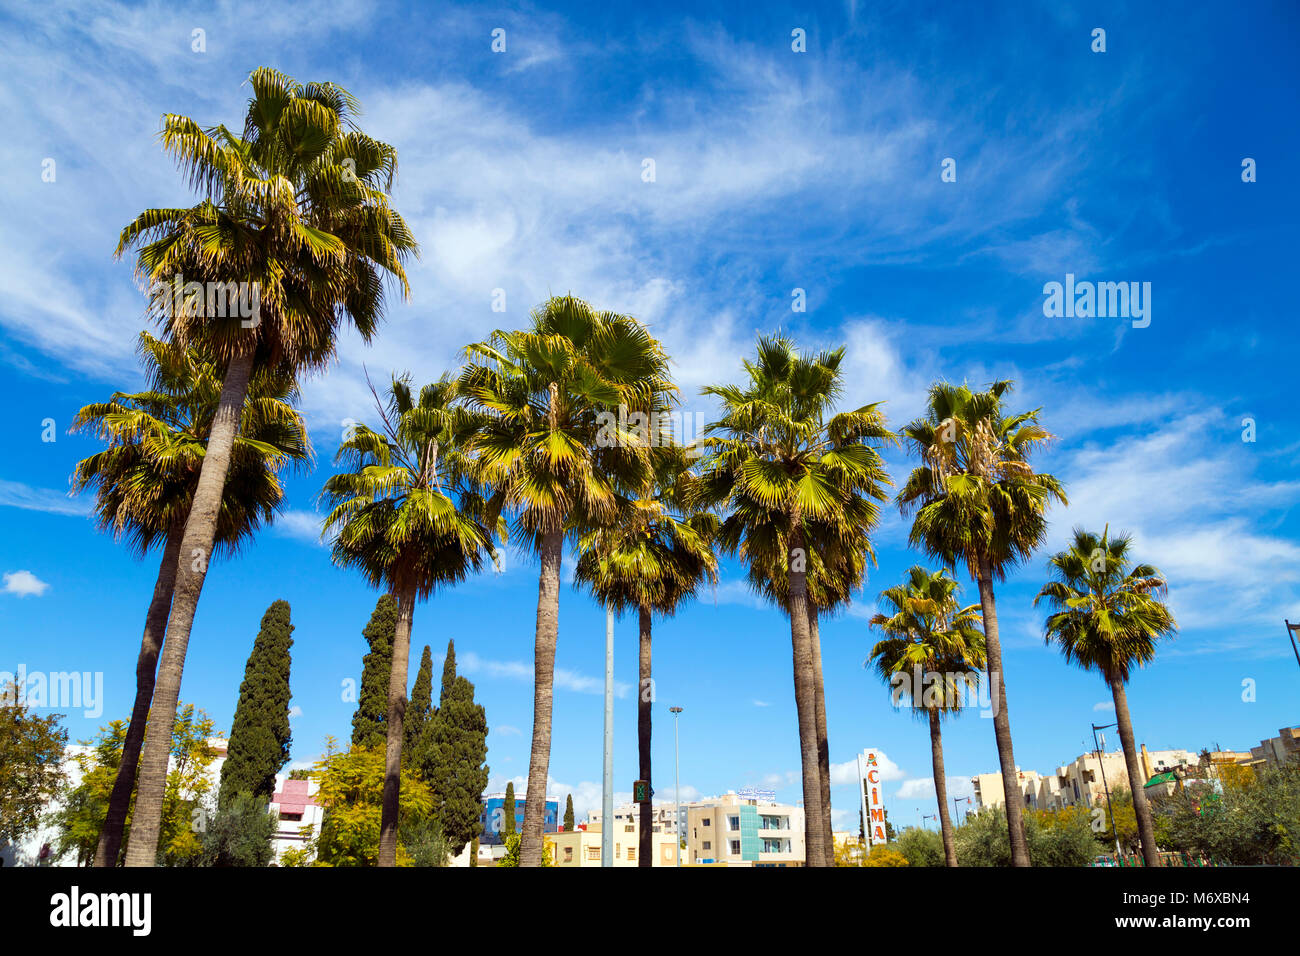 Tall palm trees (Ville Nouvelle, Fes, Morocco) Stock Photo